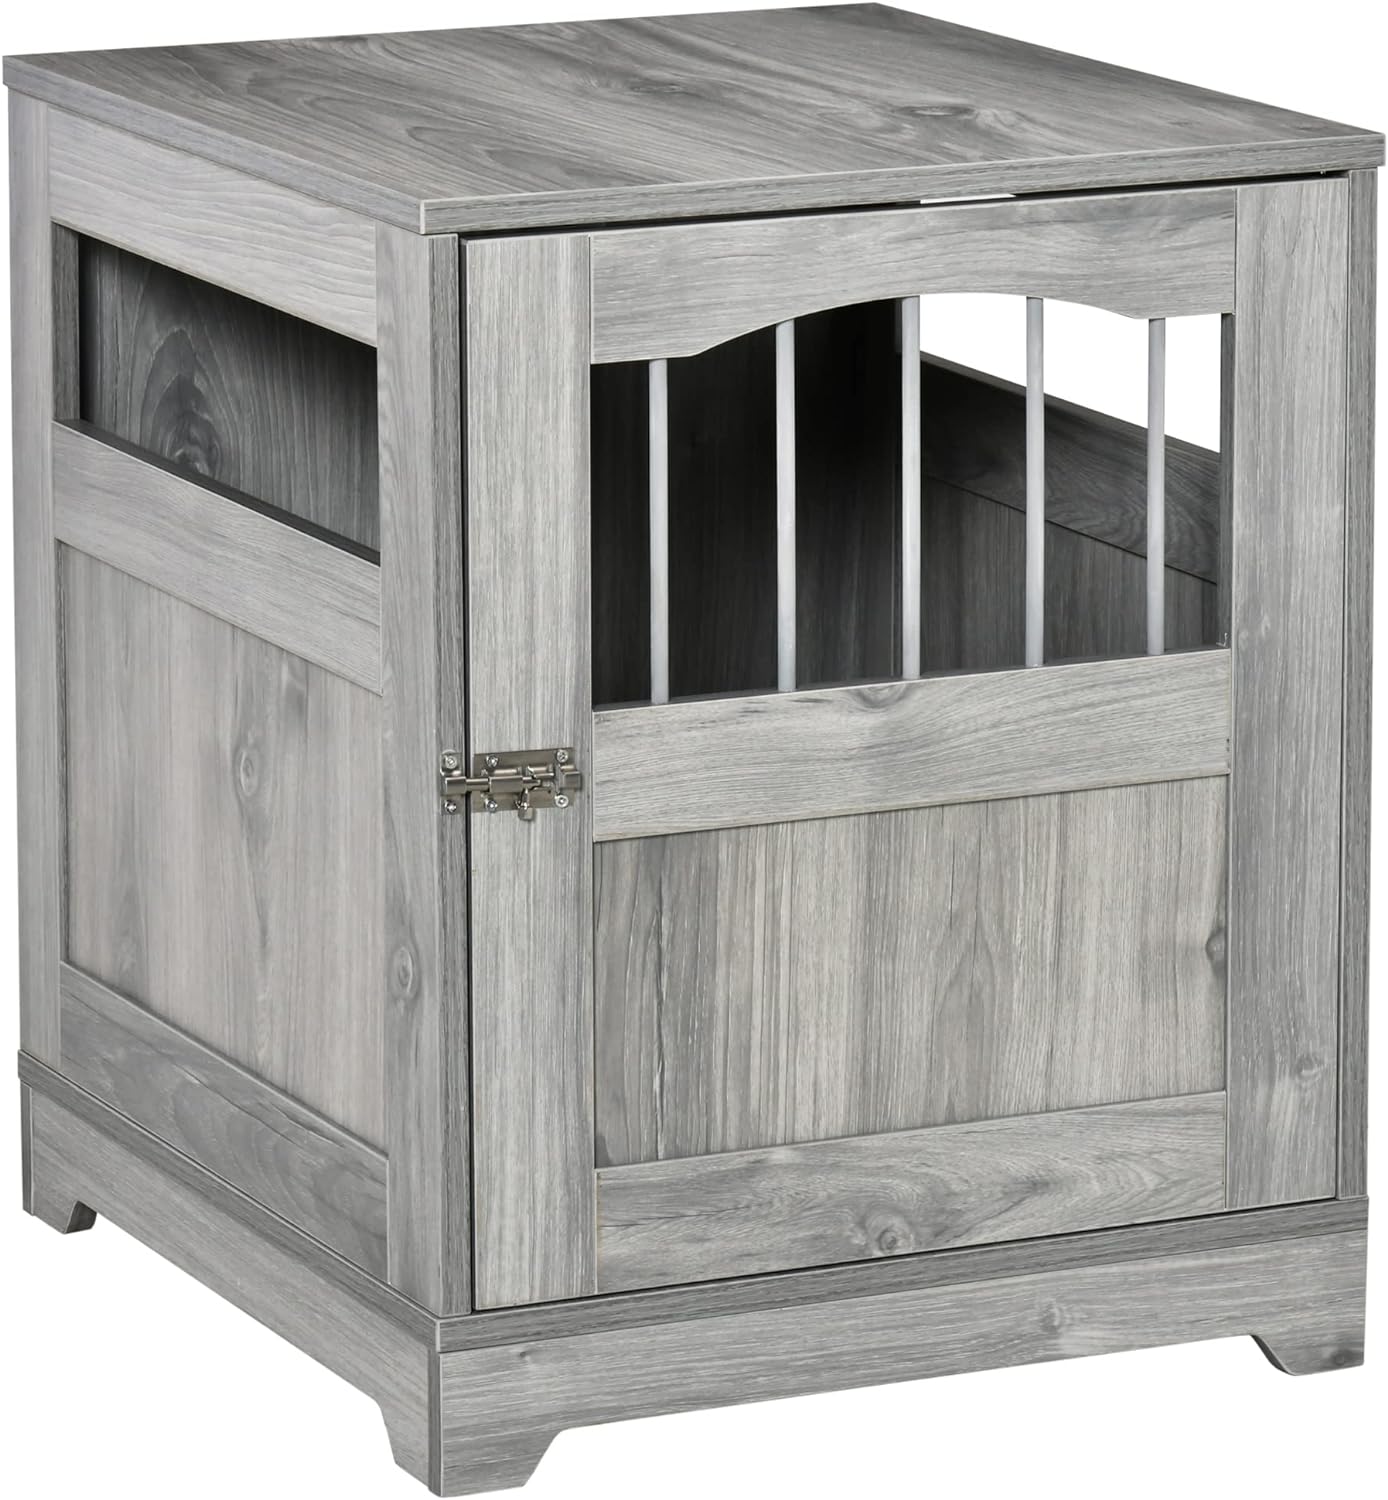 PawHut Wooden End Table Pet Kennel